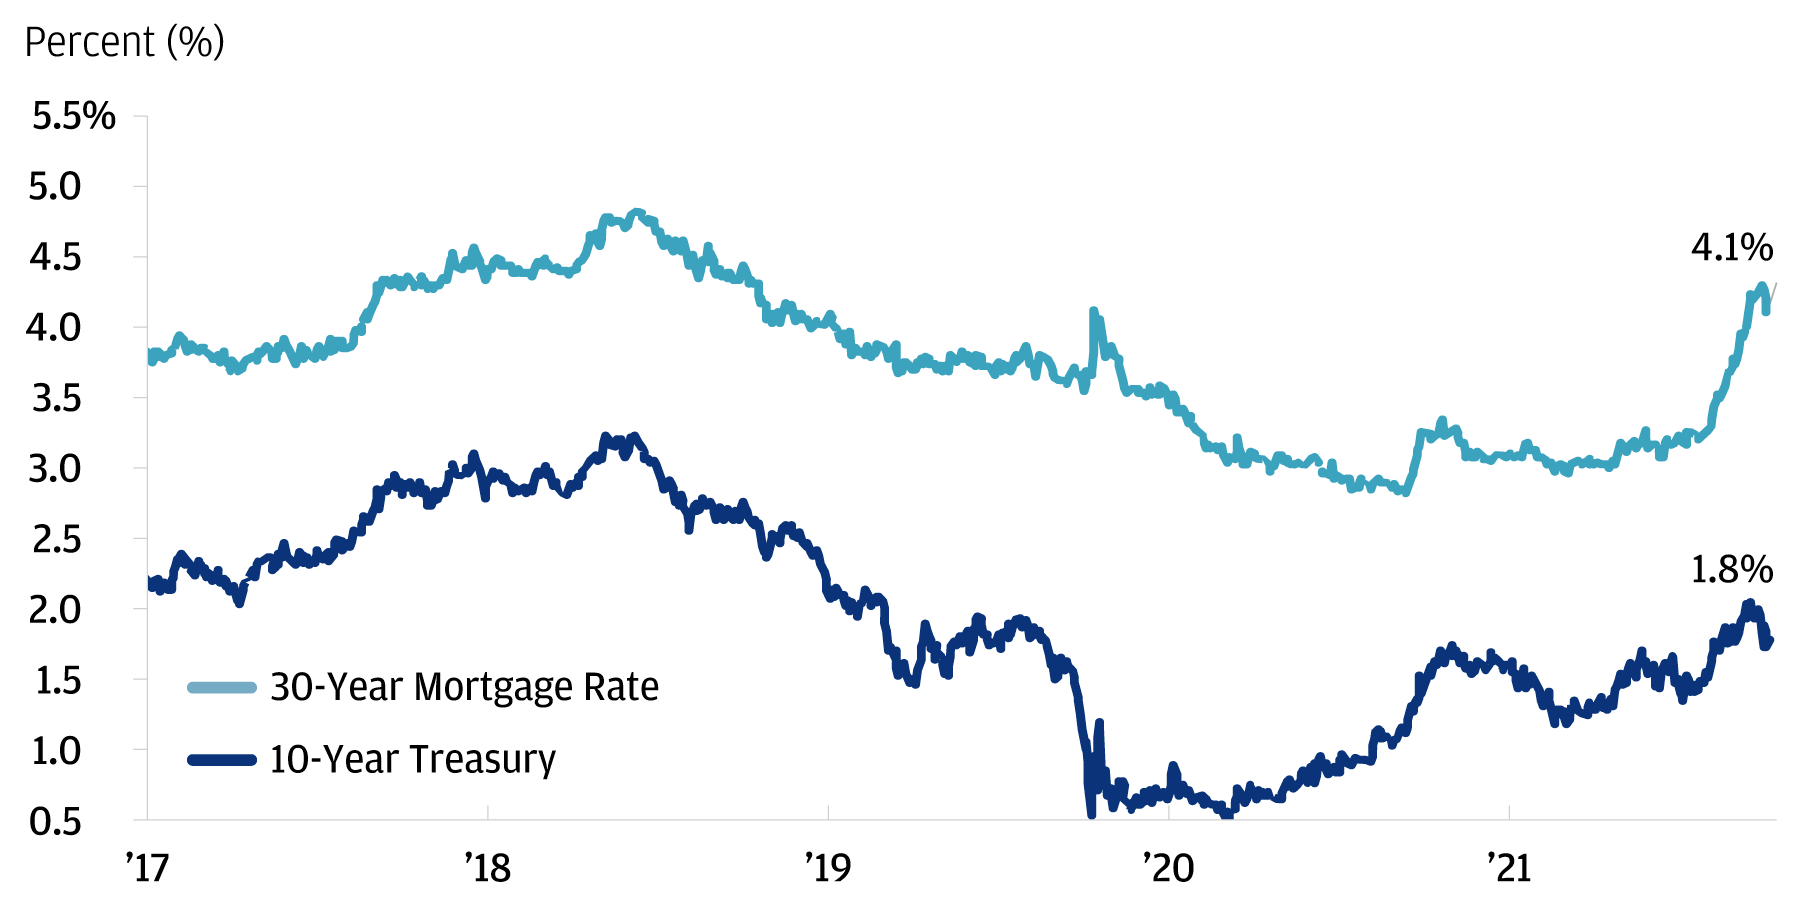 Mortgage rates illustrated represent the national average 30-year fixed mortgage rate per bankrate.com and do not represent J.P. Morgan Private Bank mortgage rates.